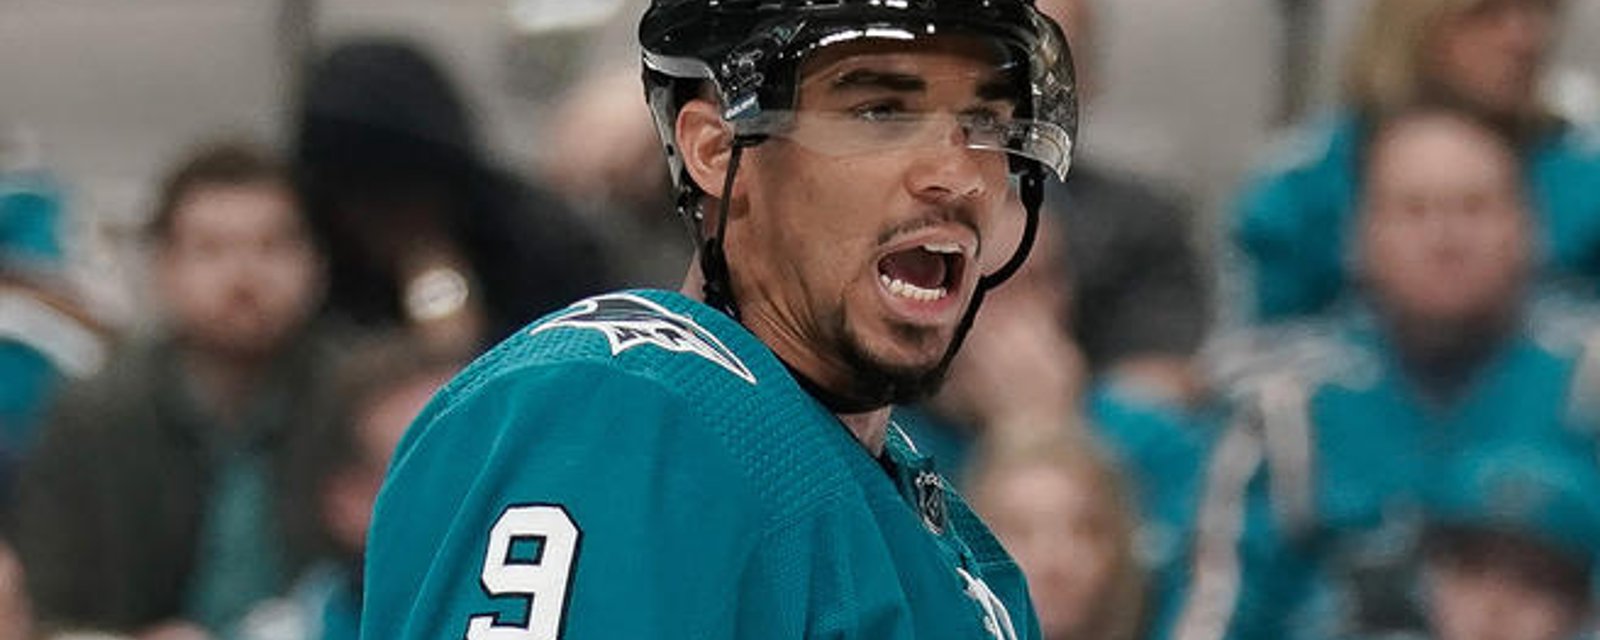 Evander Kane’s latest lawsuit could lead to criminal charges!